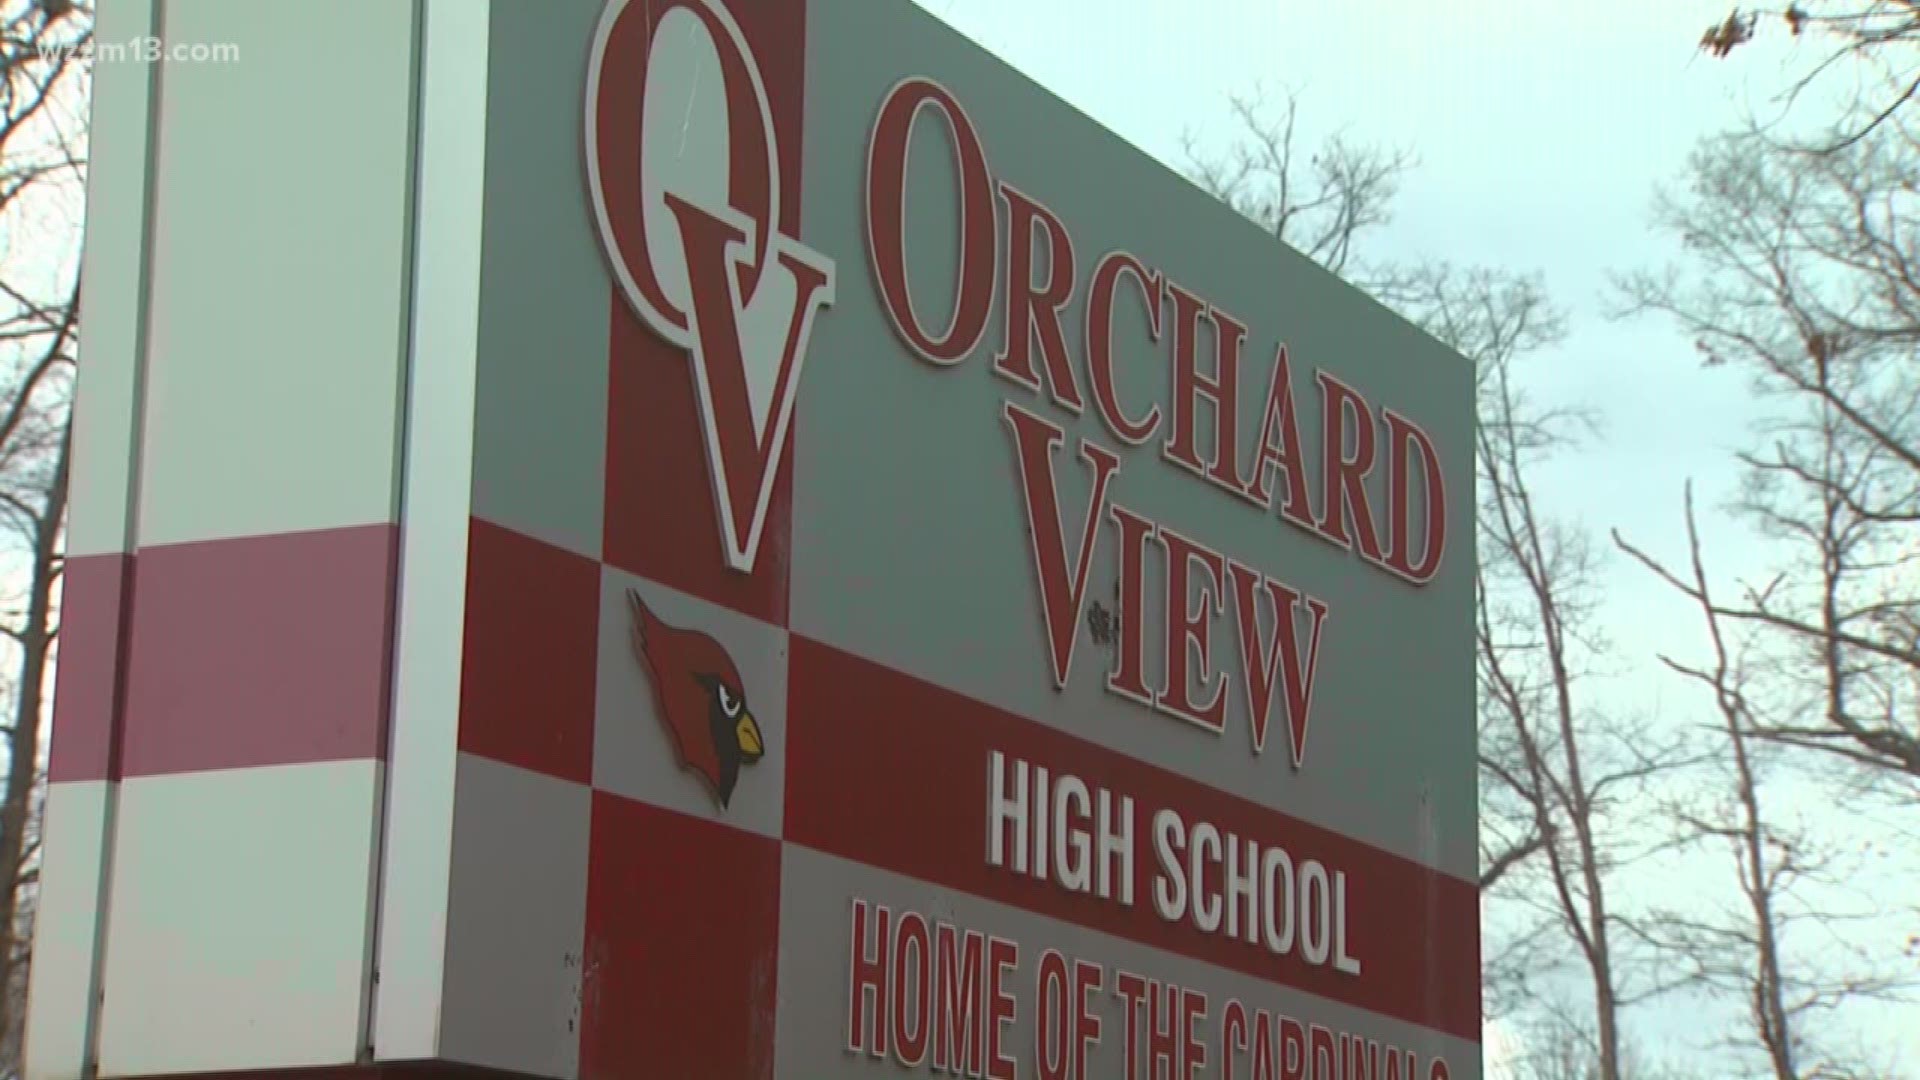 Orchard View students receive no lunch if their account balance is negative, even by a few cents